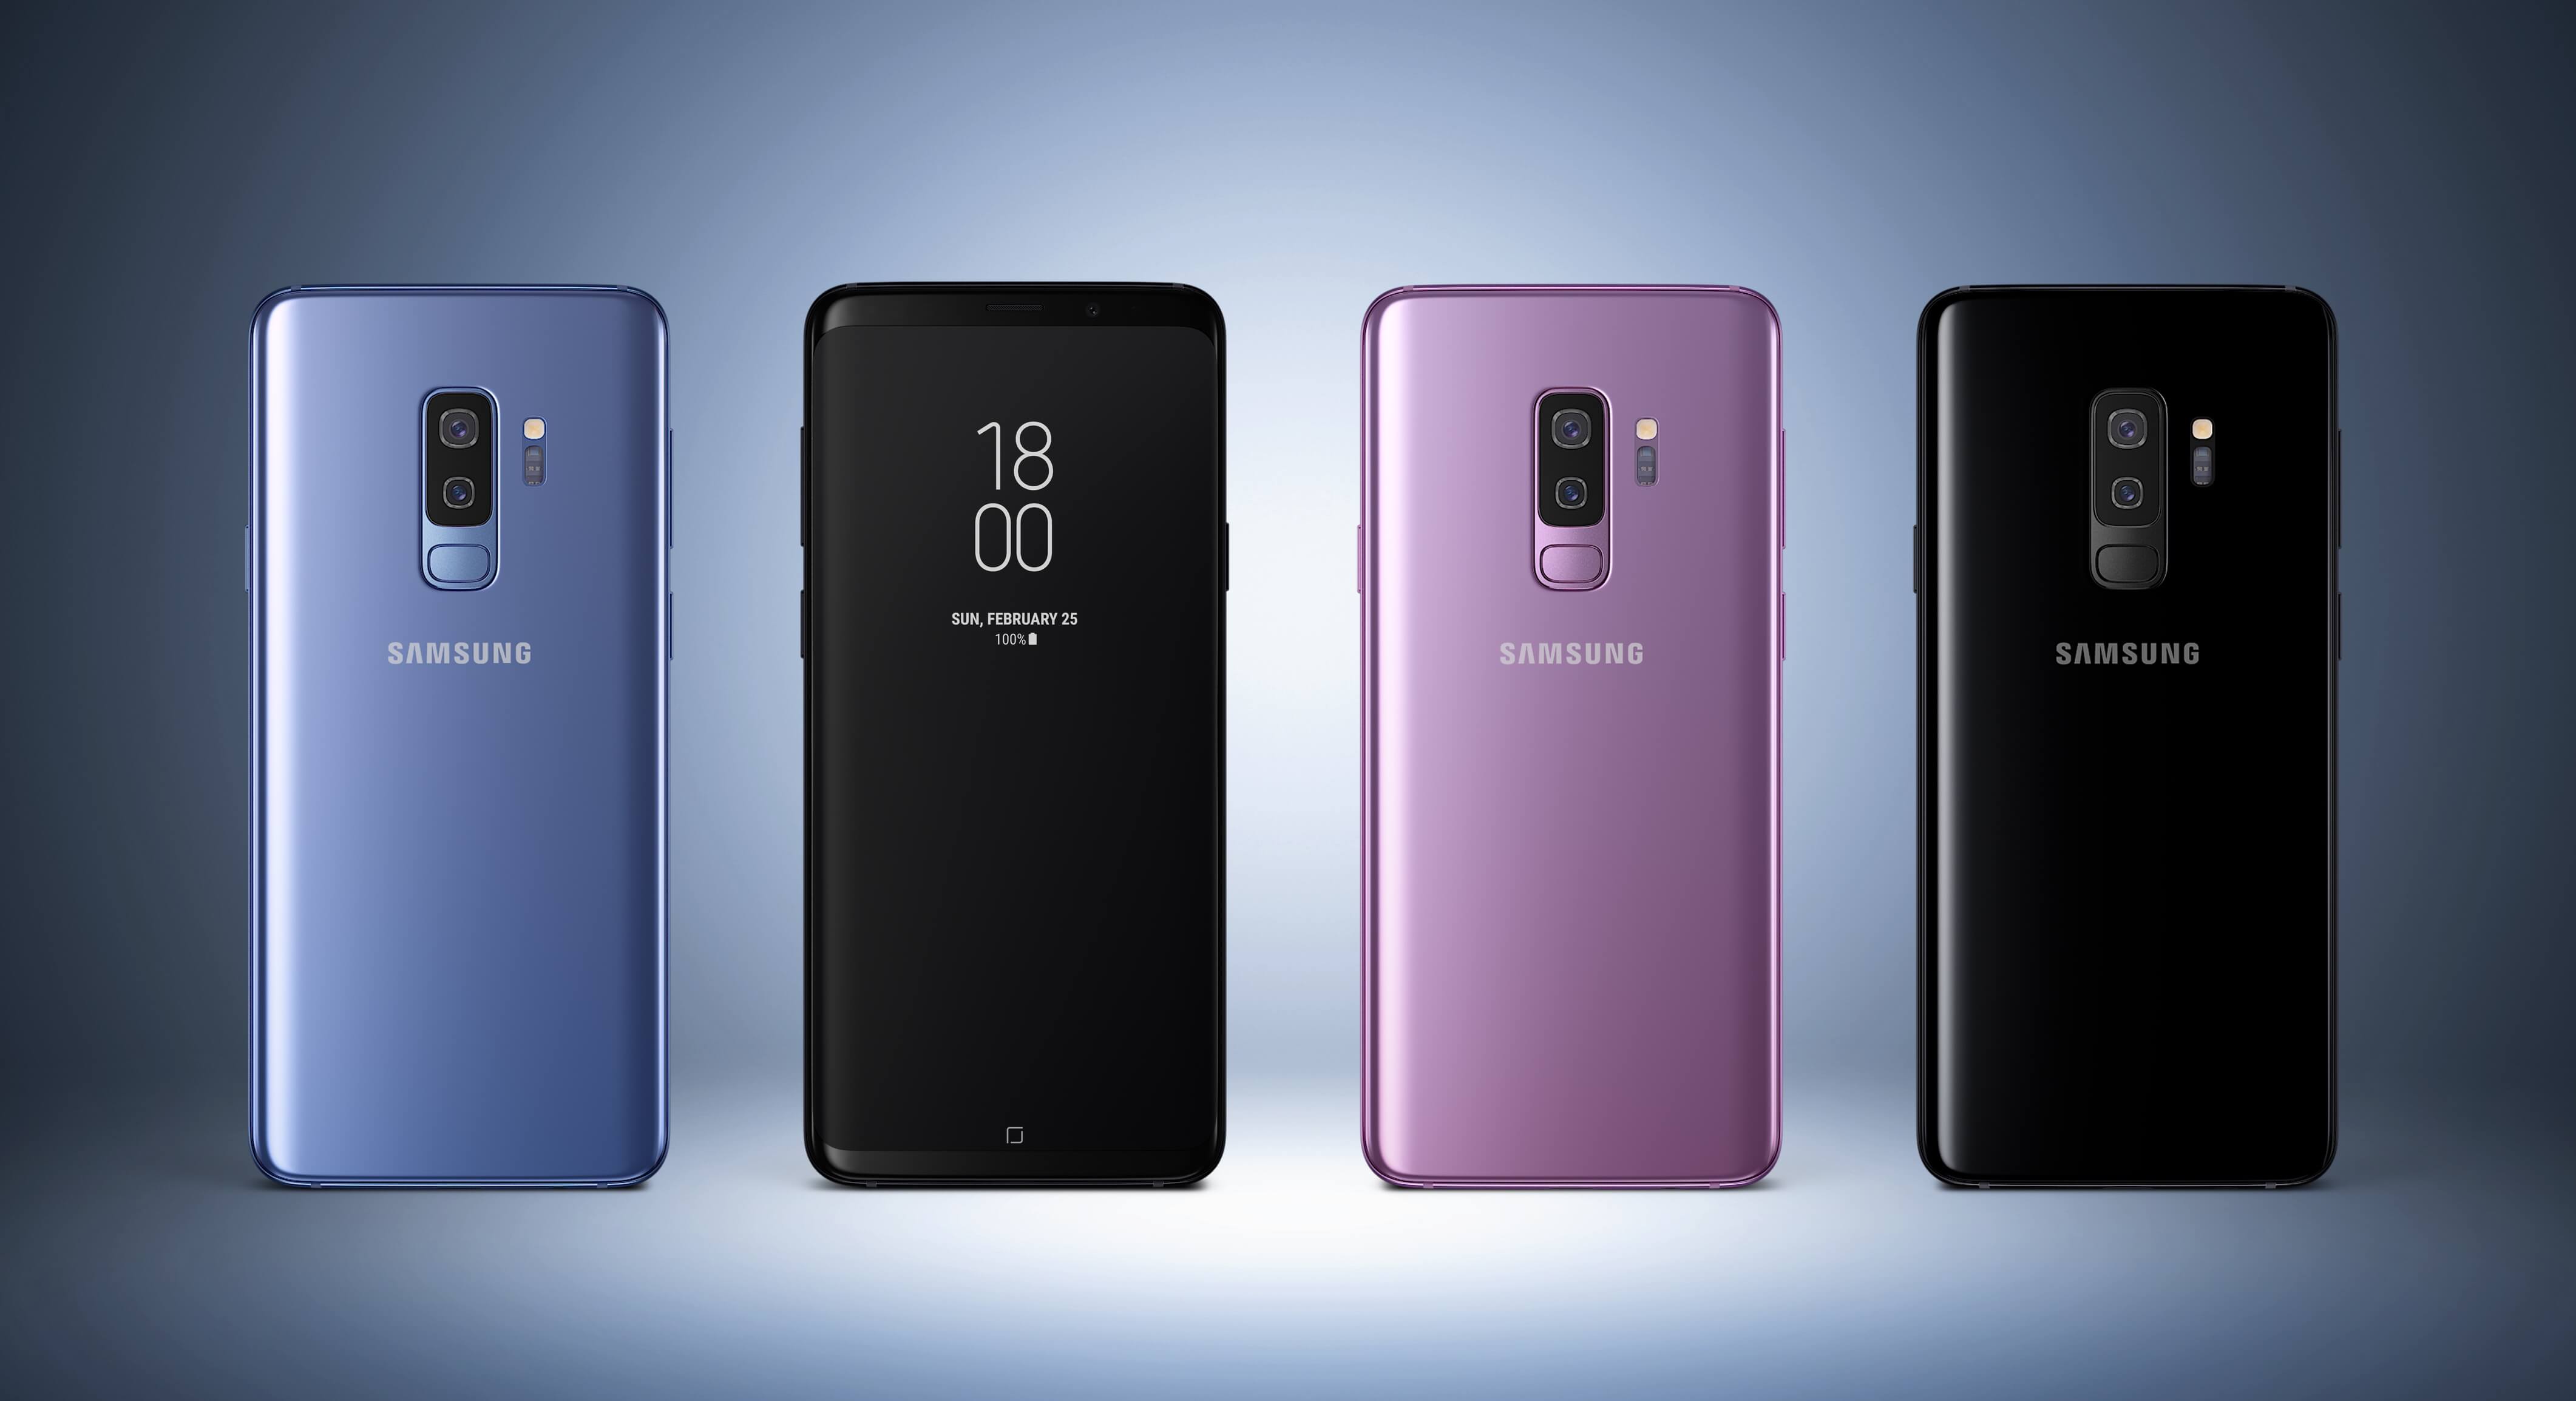 Galaxy S9 pre-orders are reportedly below expectations